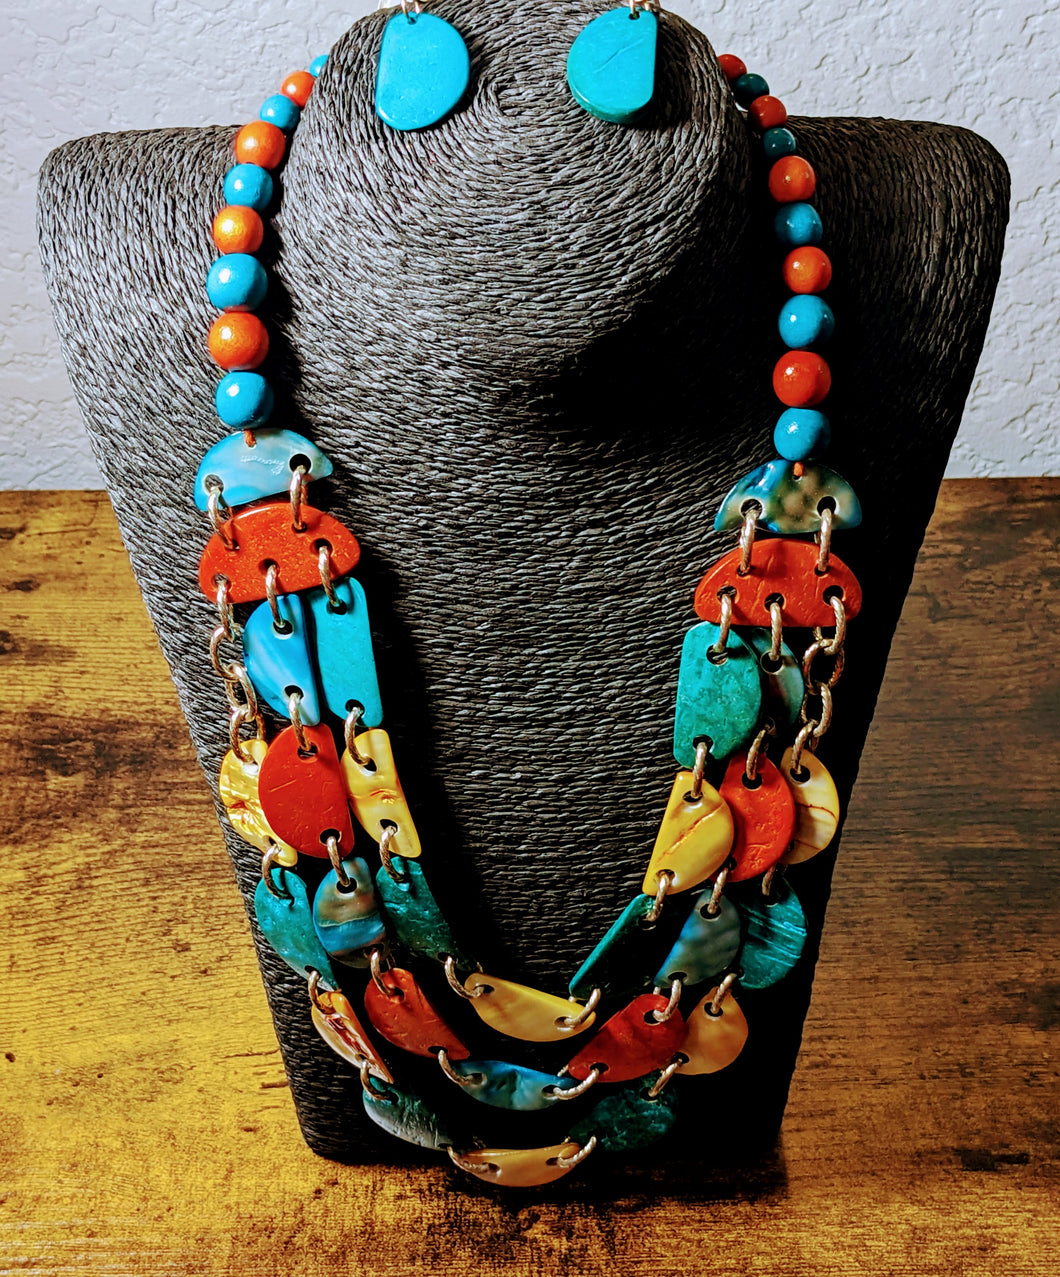 Tangerine & Teal Shells and Wood Necklace Set